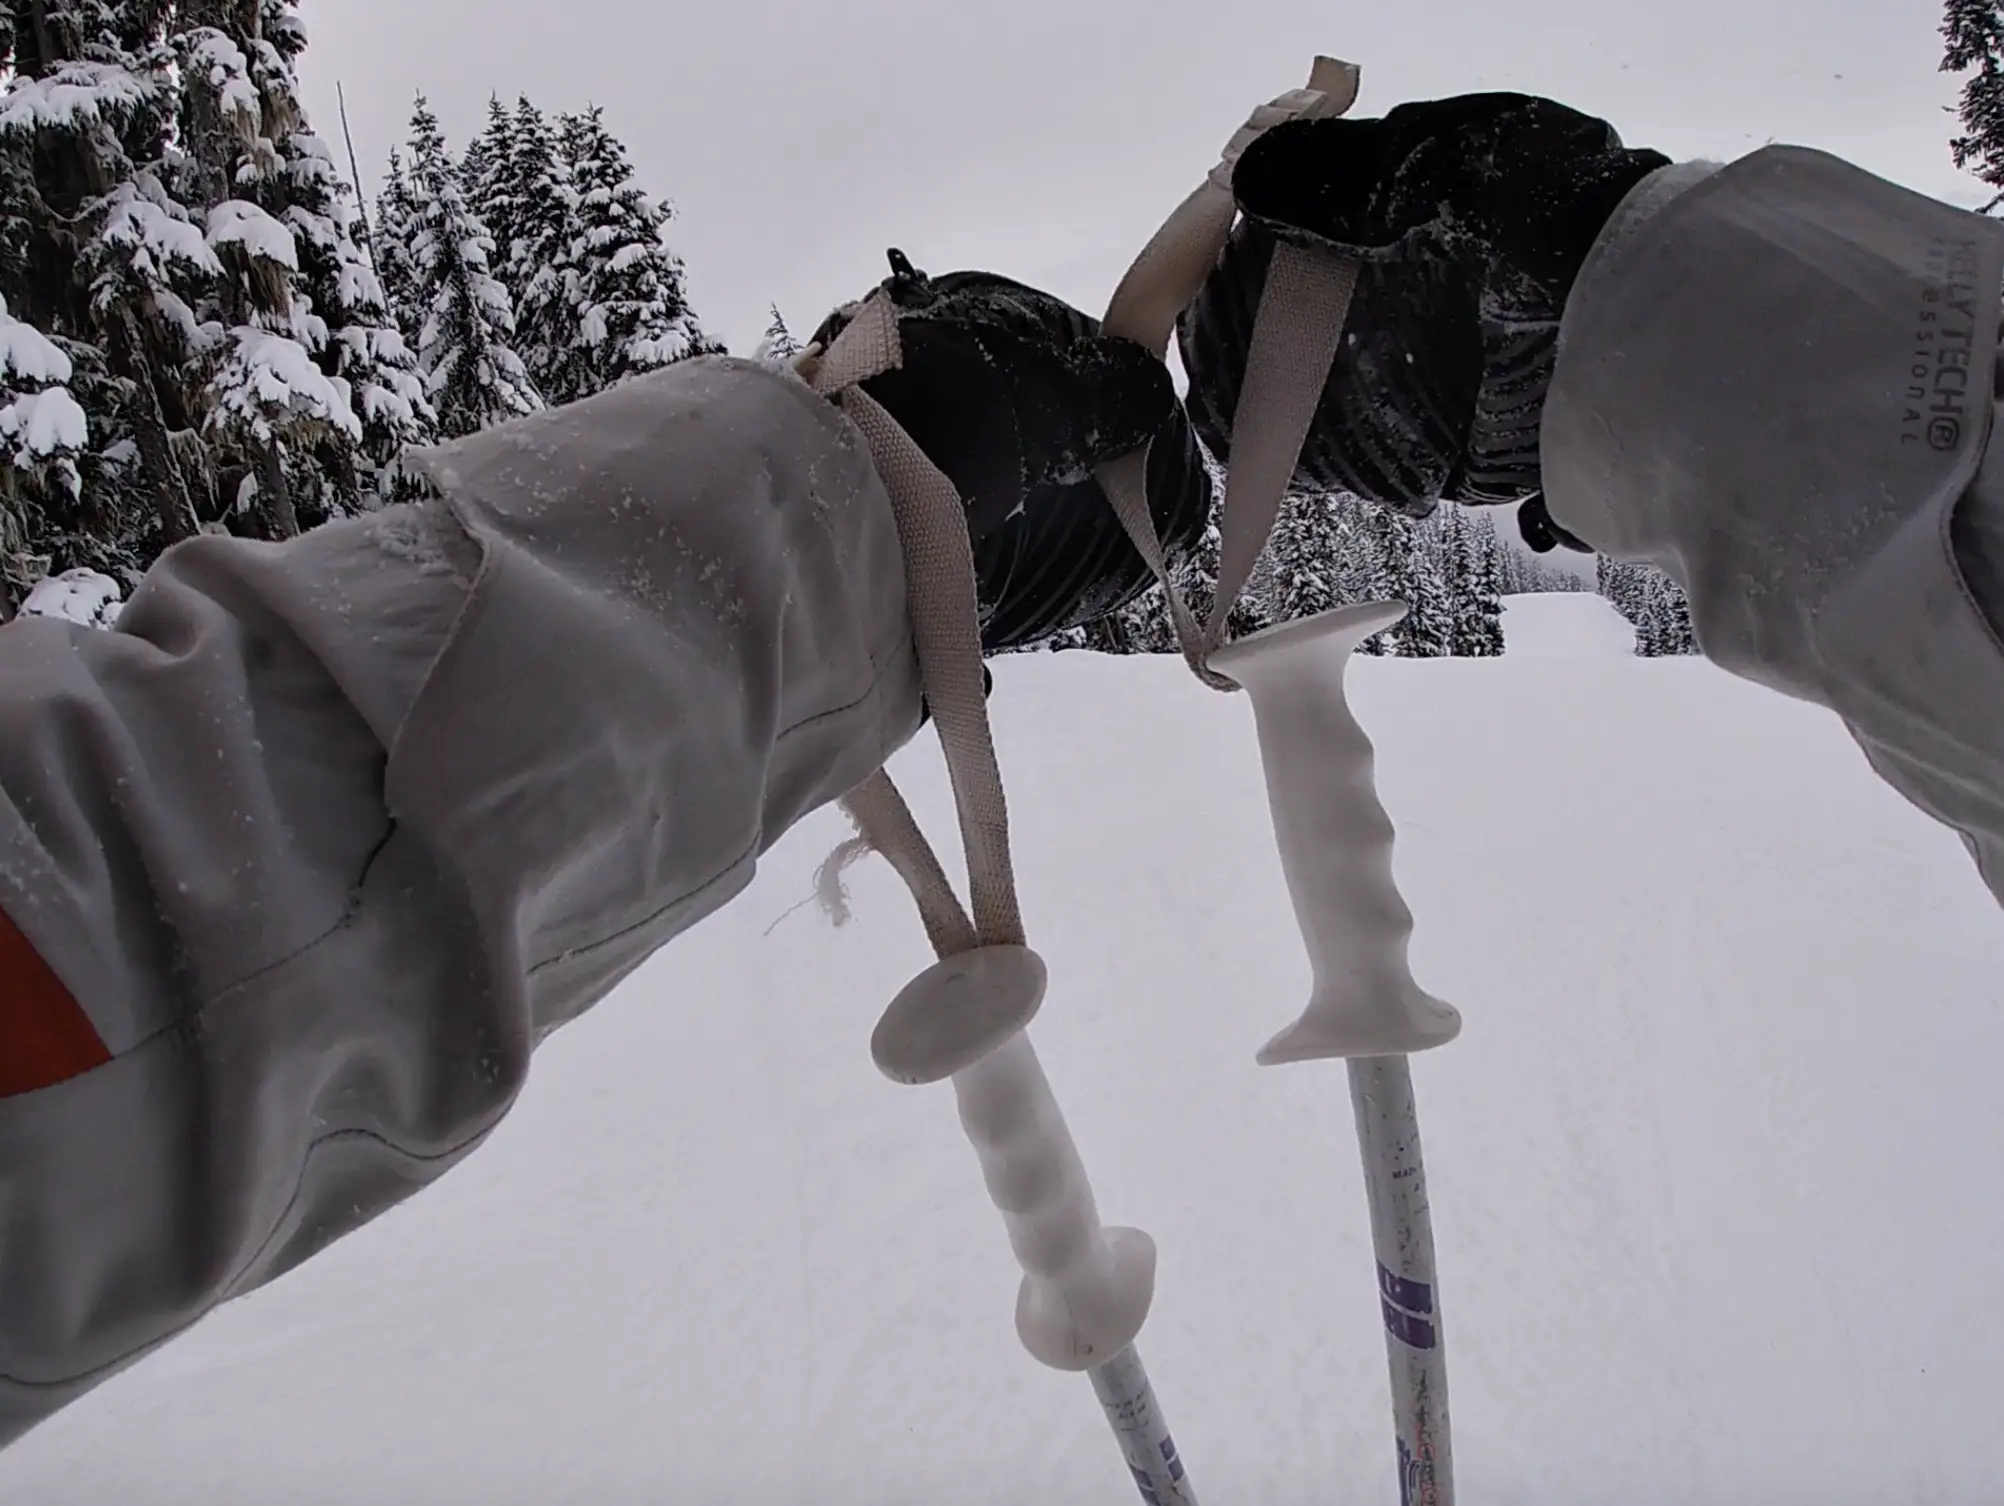 How to ski in trees, tree skiing in Whistler 